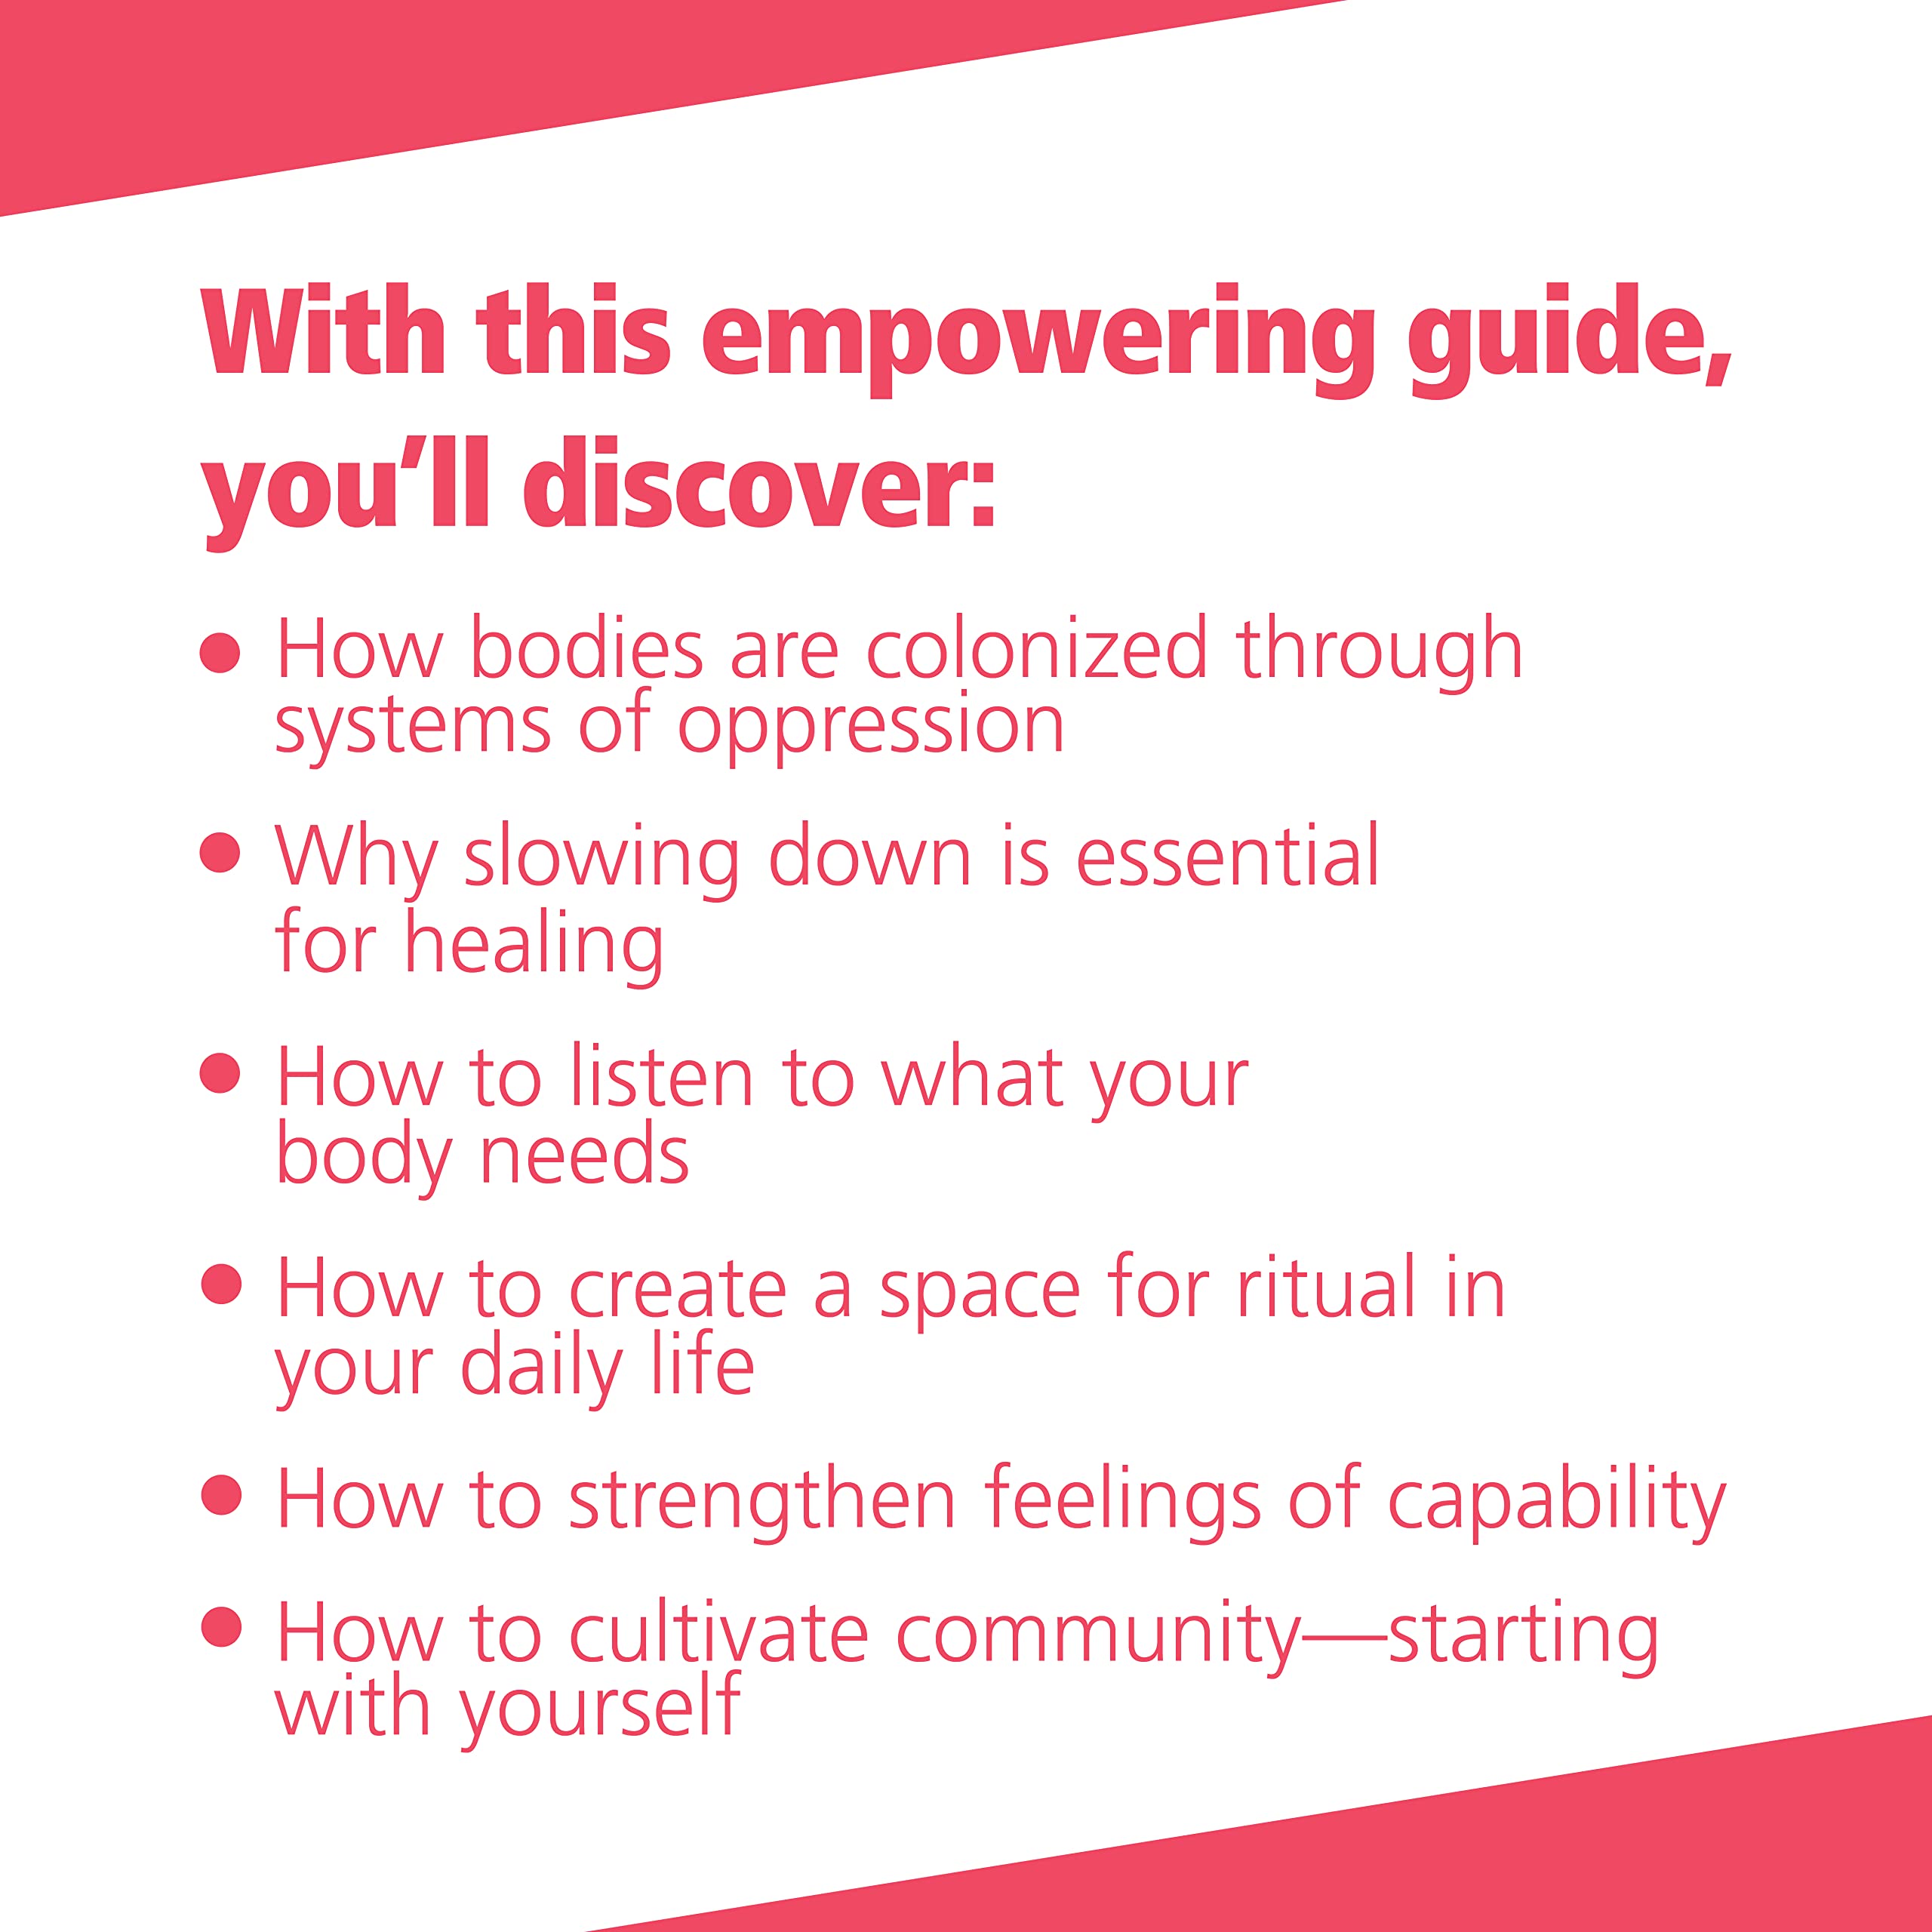 Decolonizing the Body: Healing, Body-Centered Practices for Women of Color to Reclaim Confidence, Dignity, and Self-Worth Paperback